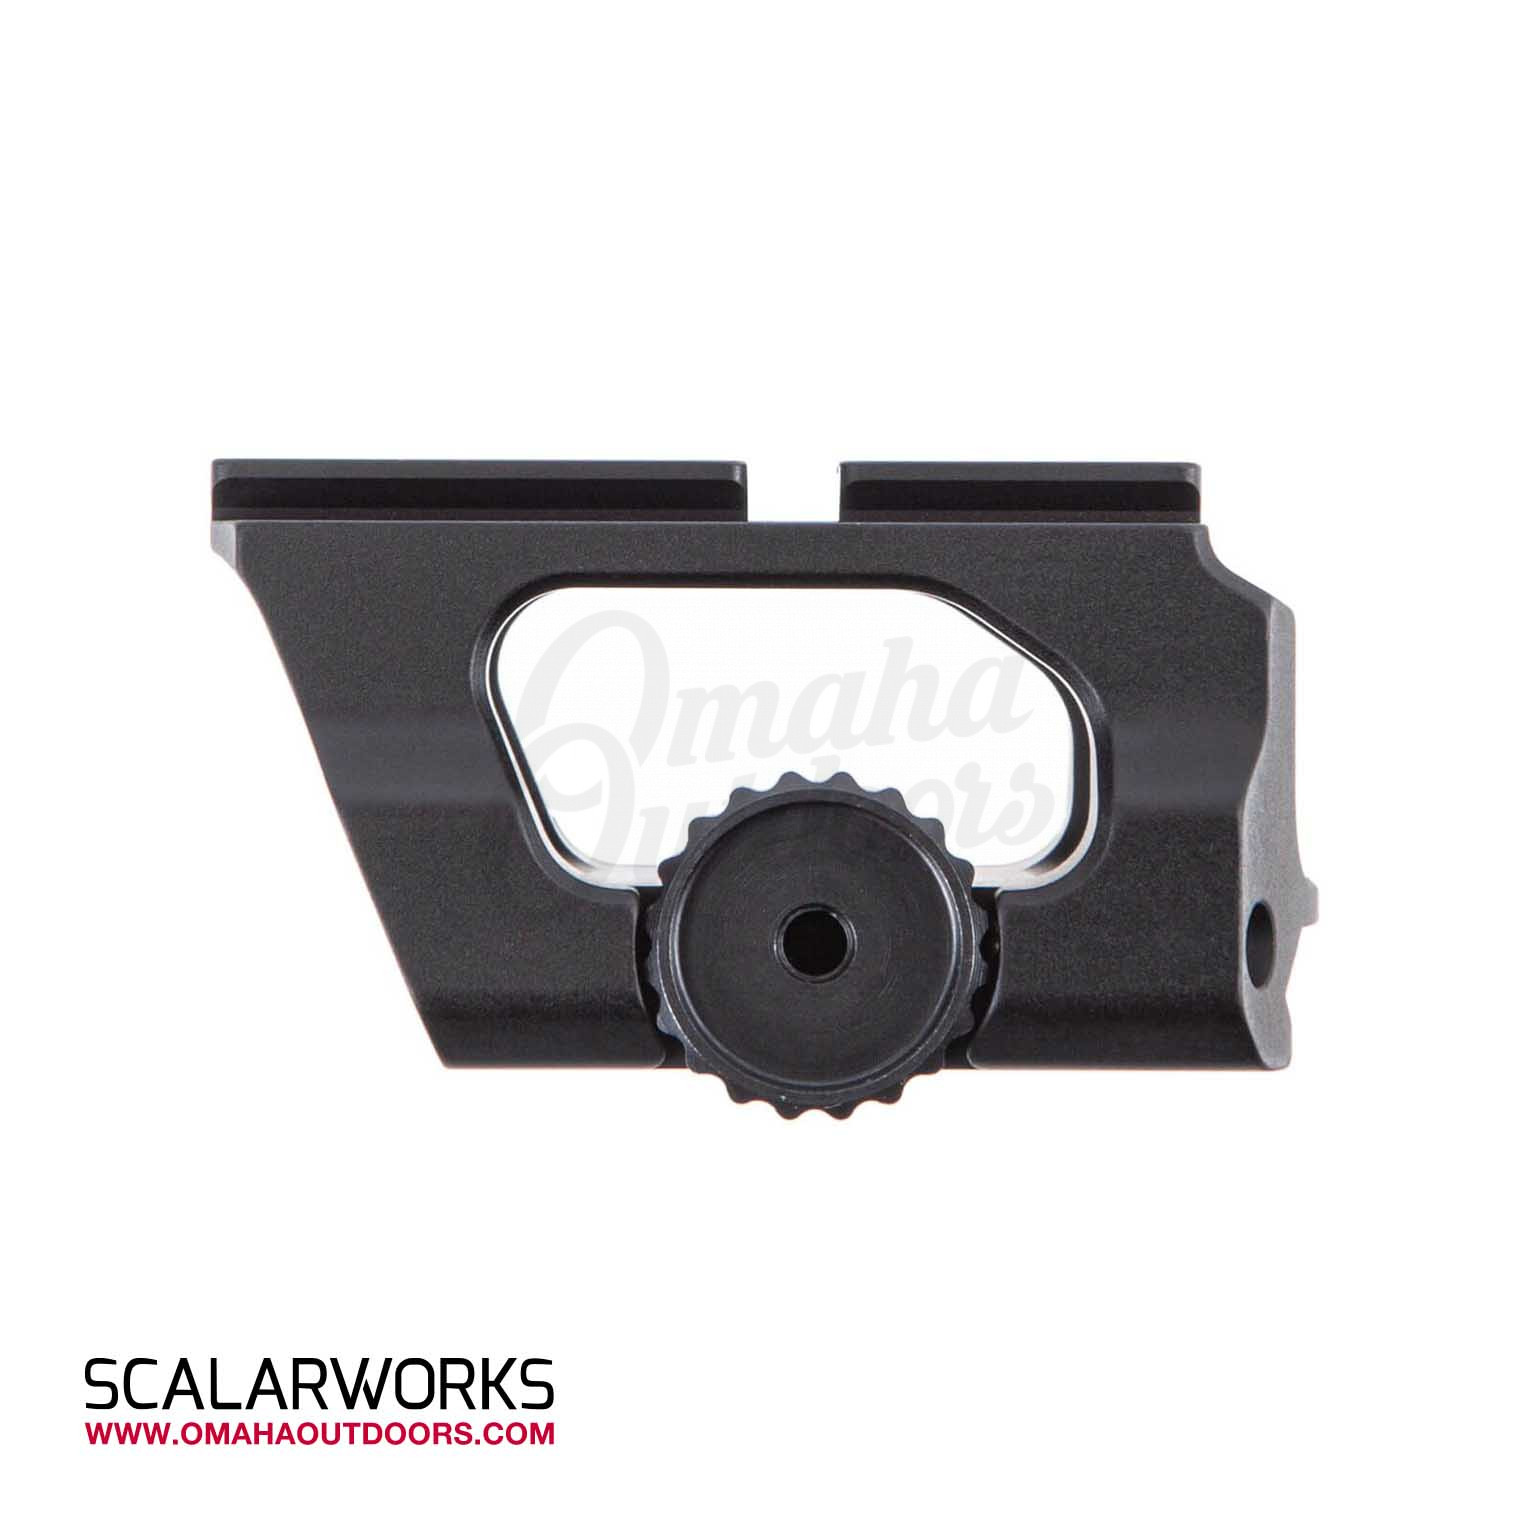 SCALARWORKS LEAP 03 Aimpoint ACRO Mount 1.57 - Primary Weapons Systems